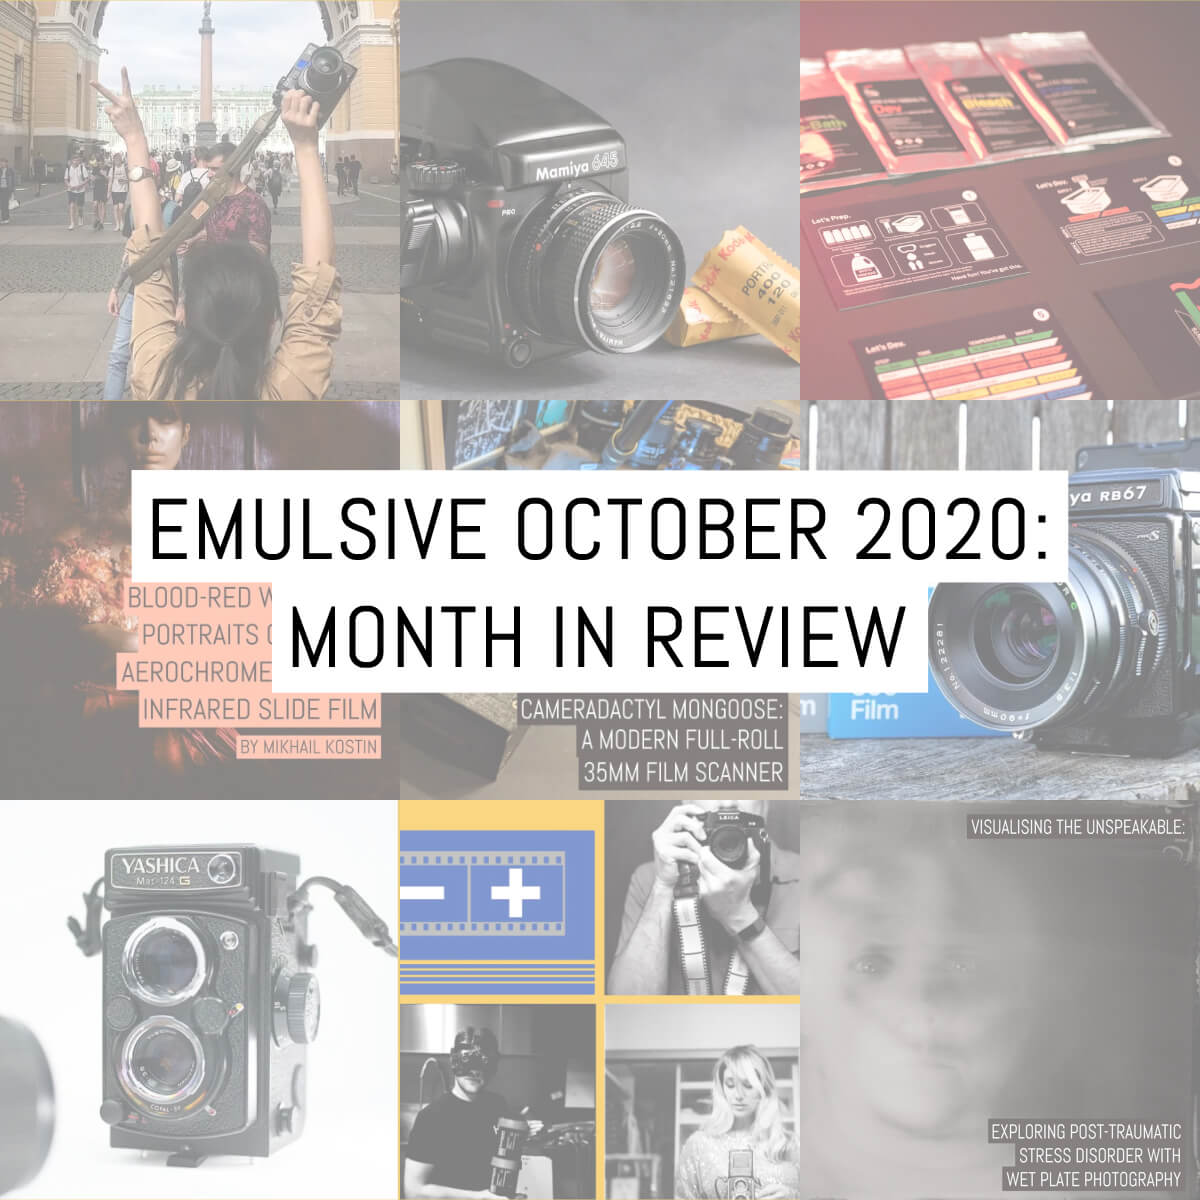 Month in review: October 2020